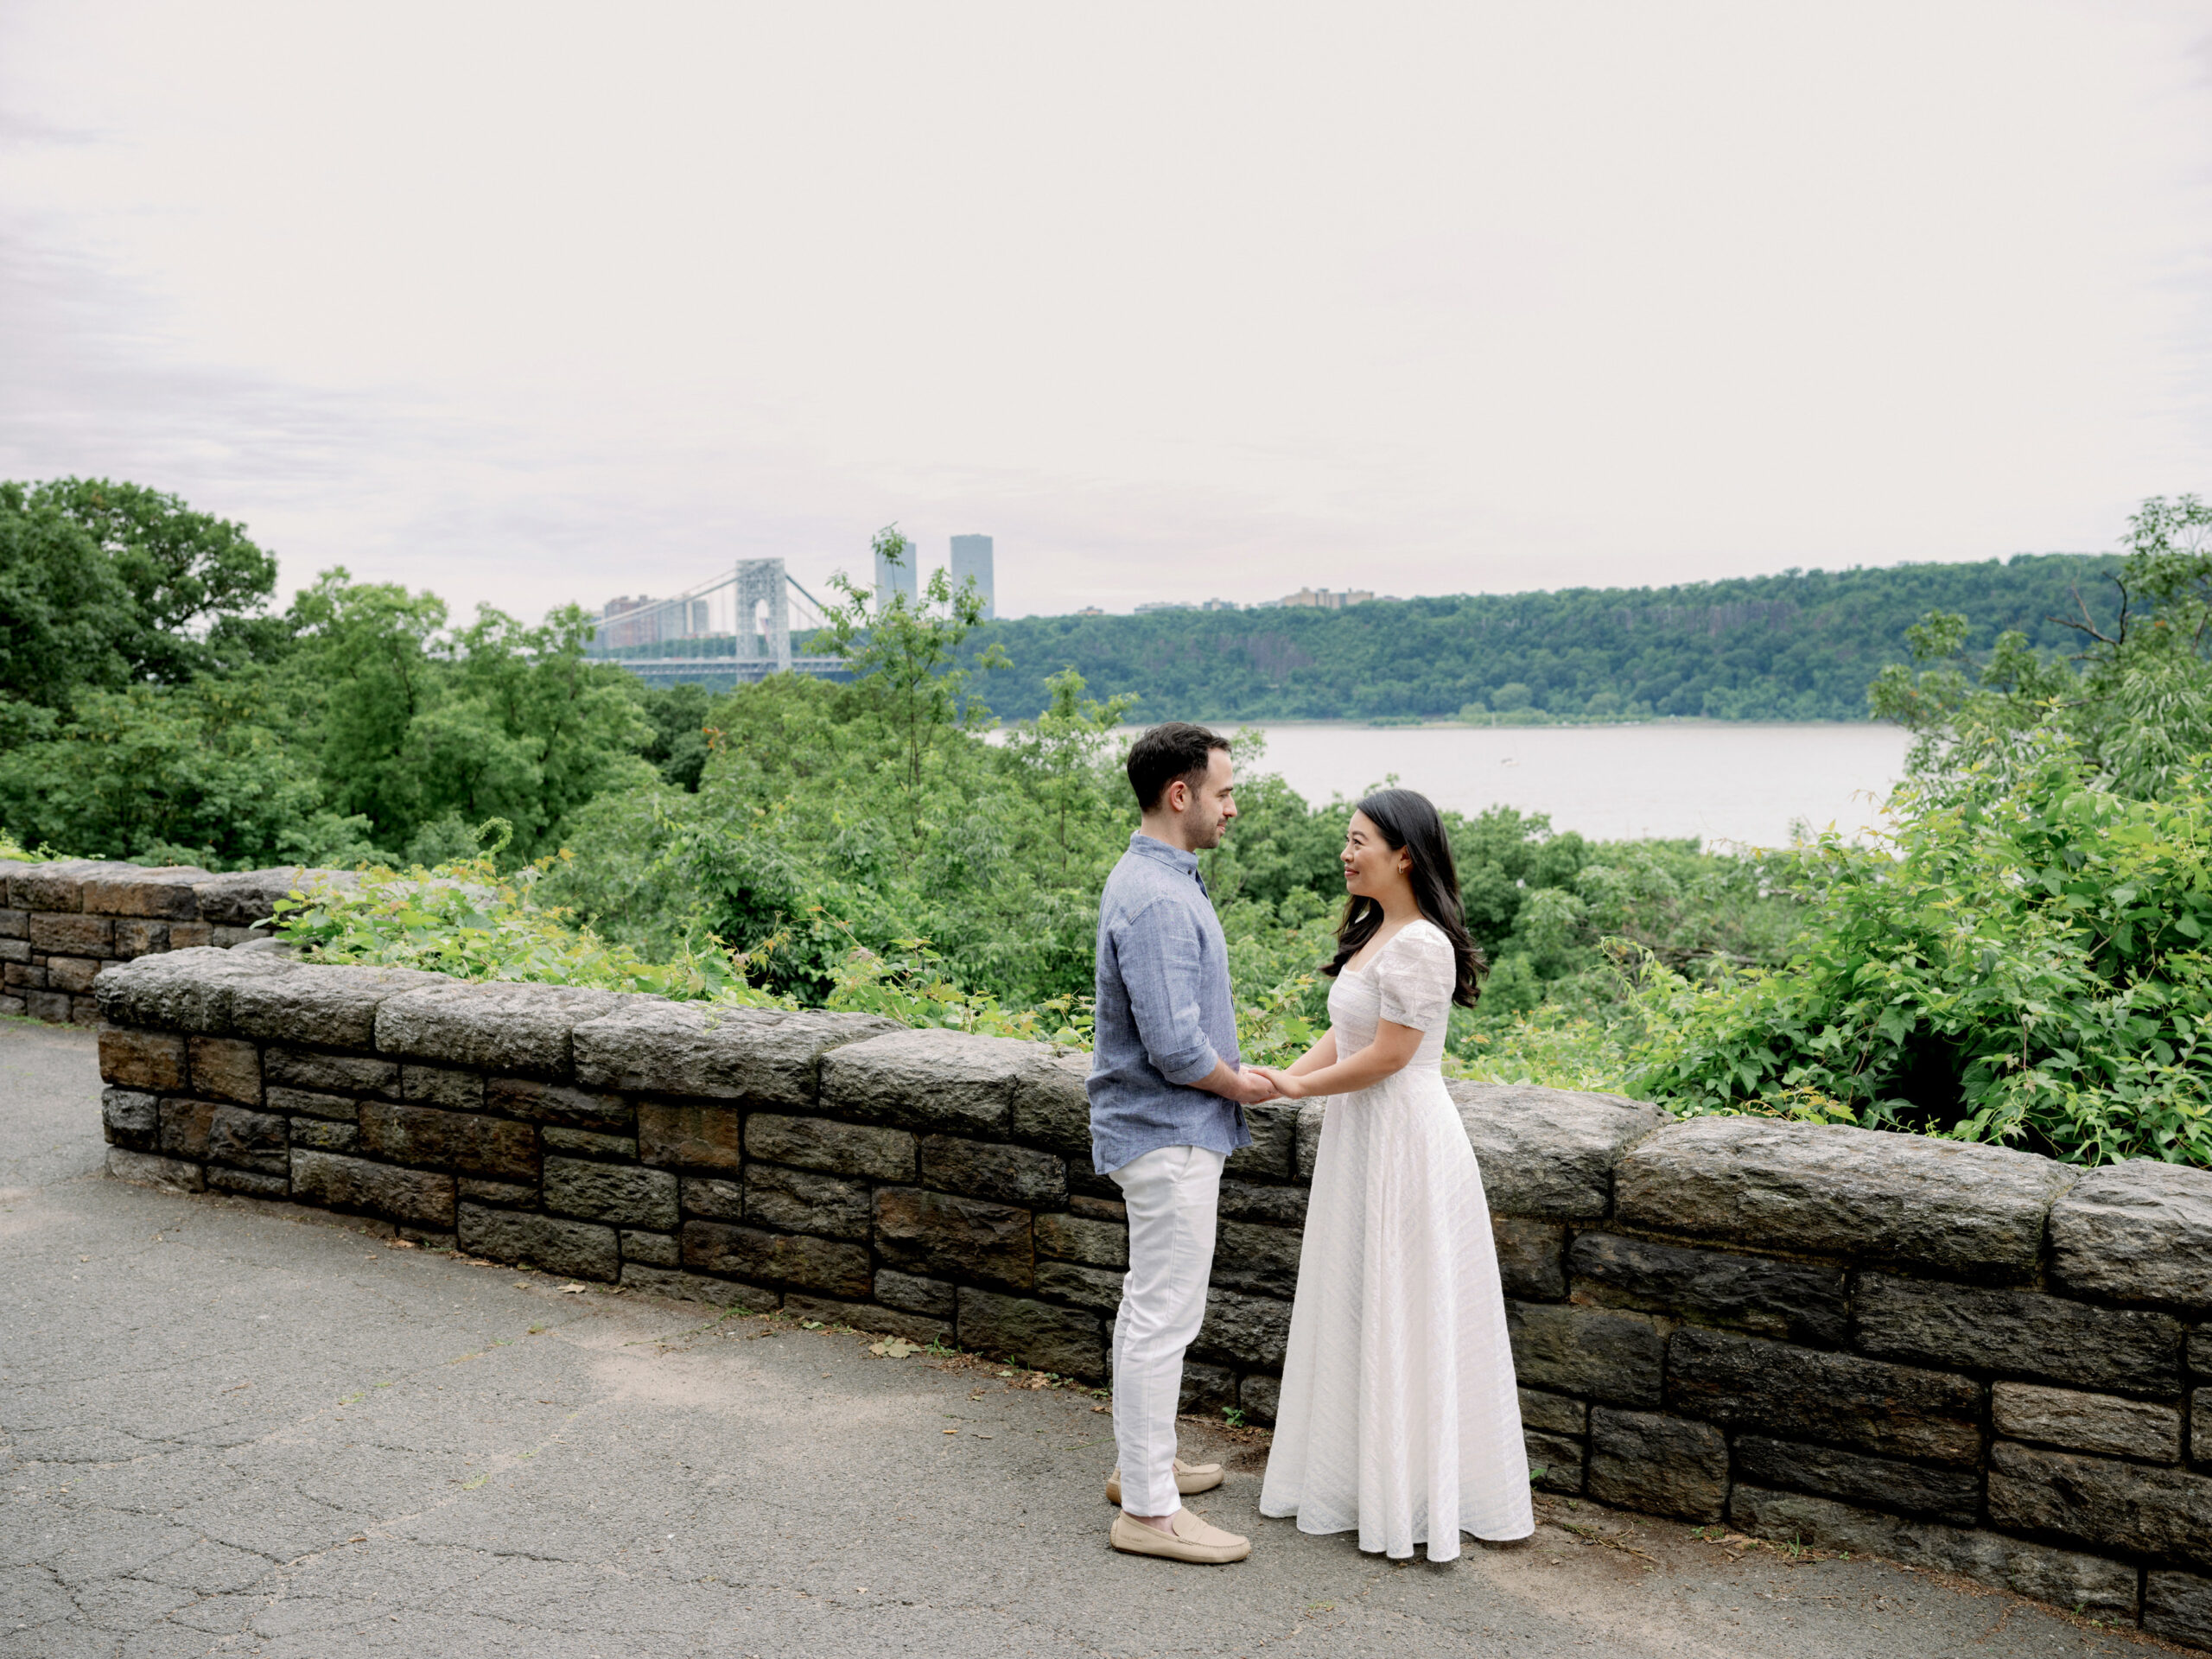 Engagement session photo outdoors with nature in the background. Wedding photography add-ons image by Jenny Fu Studio